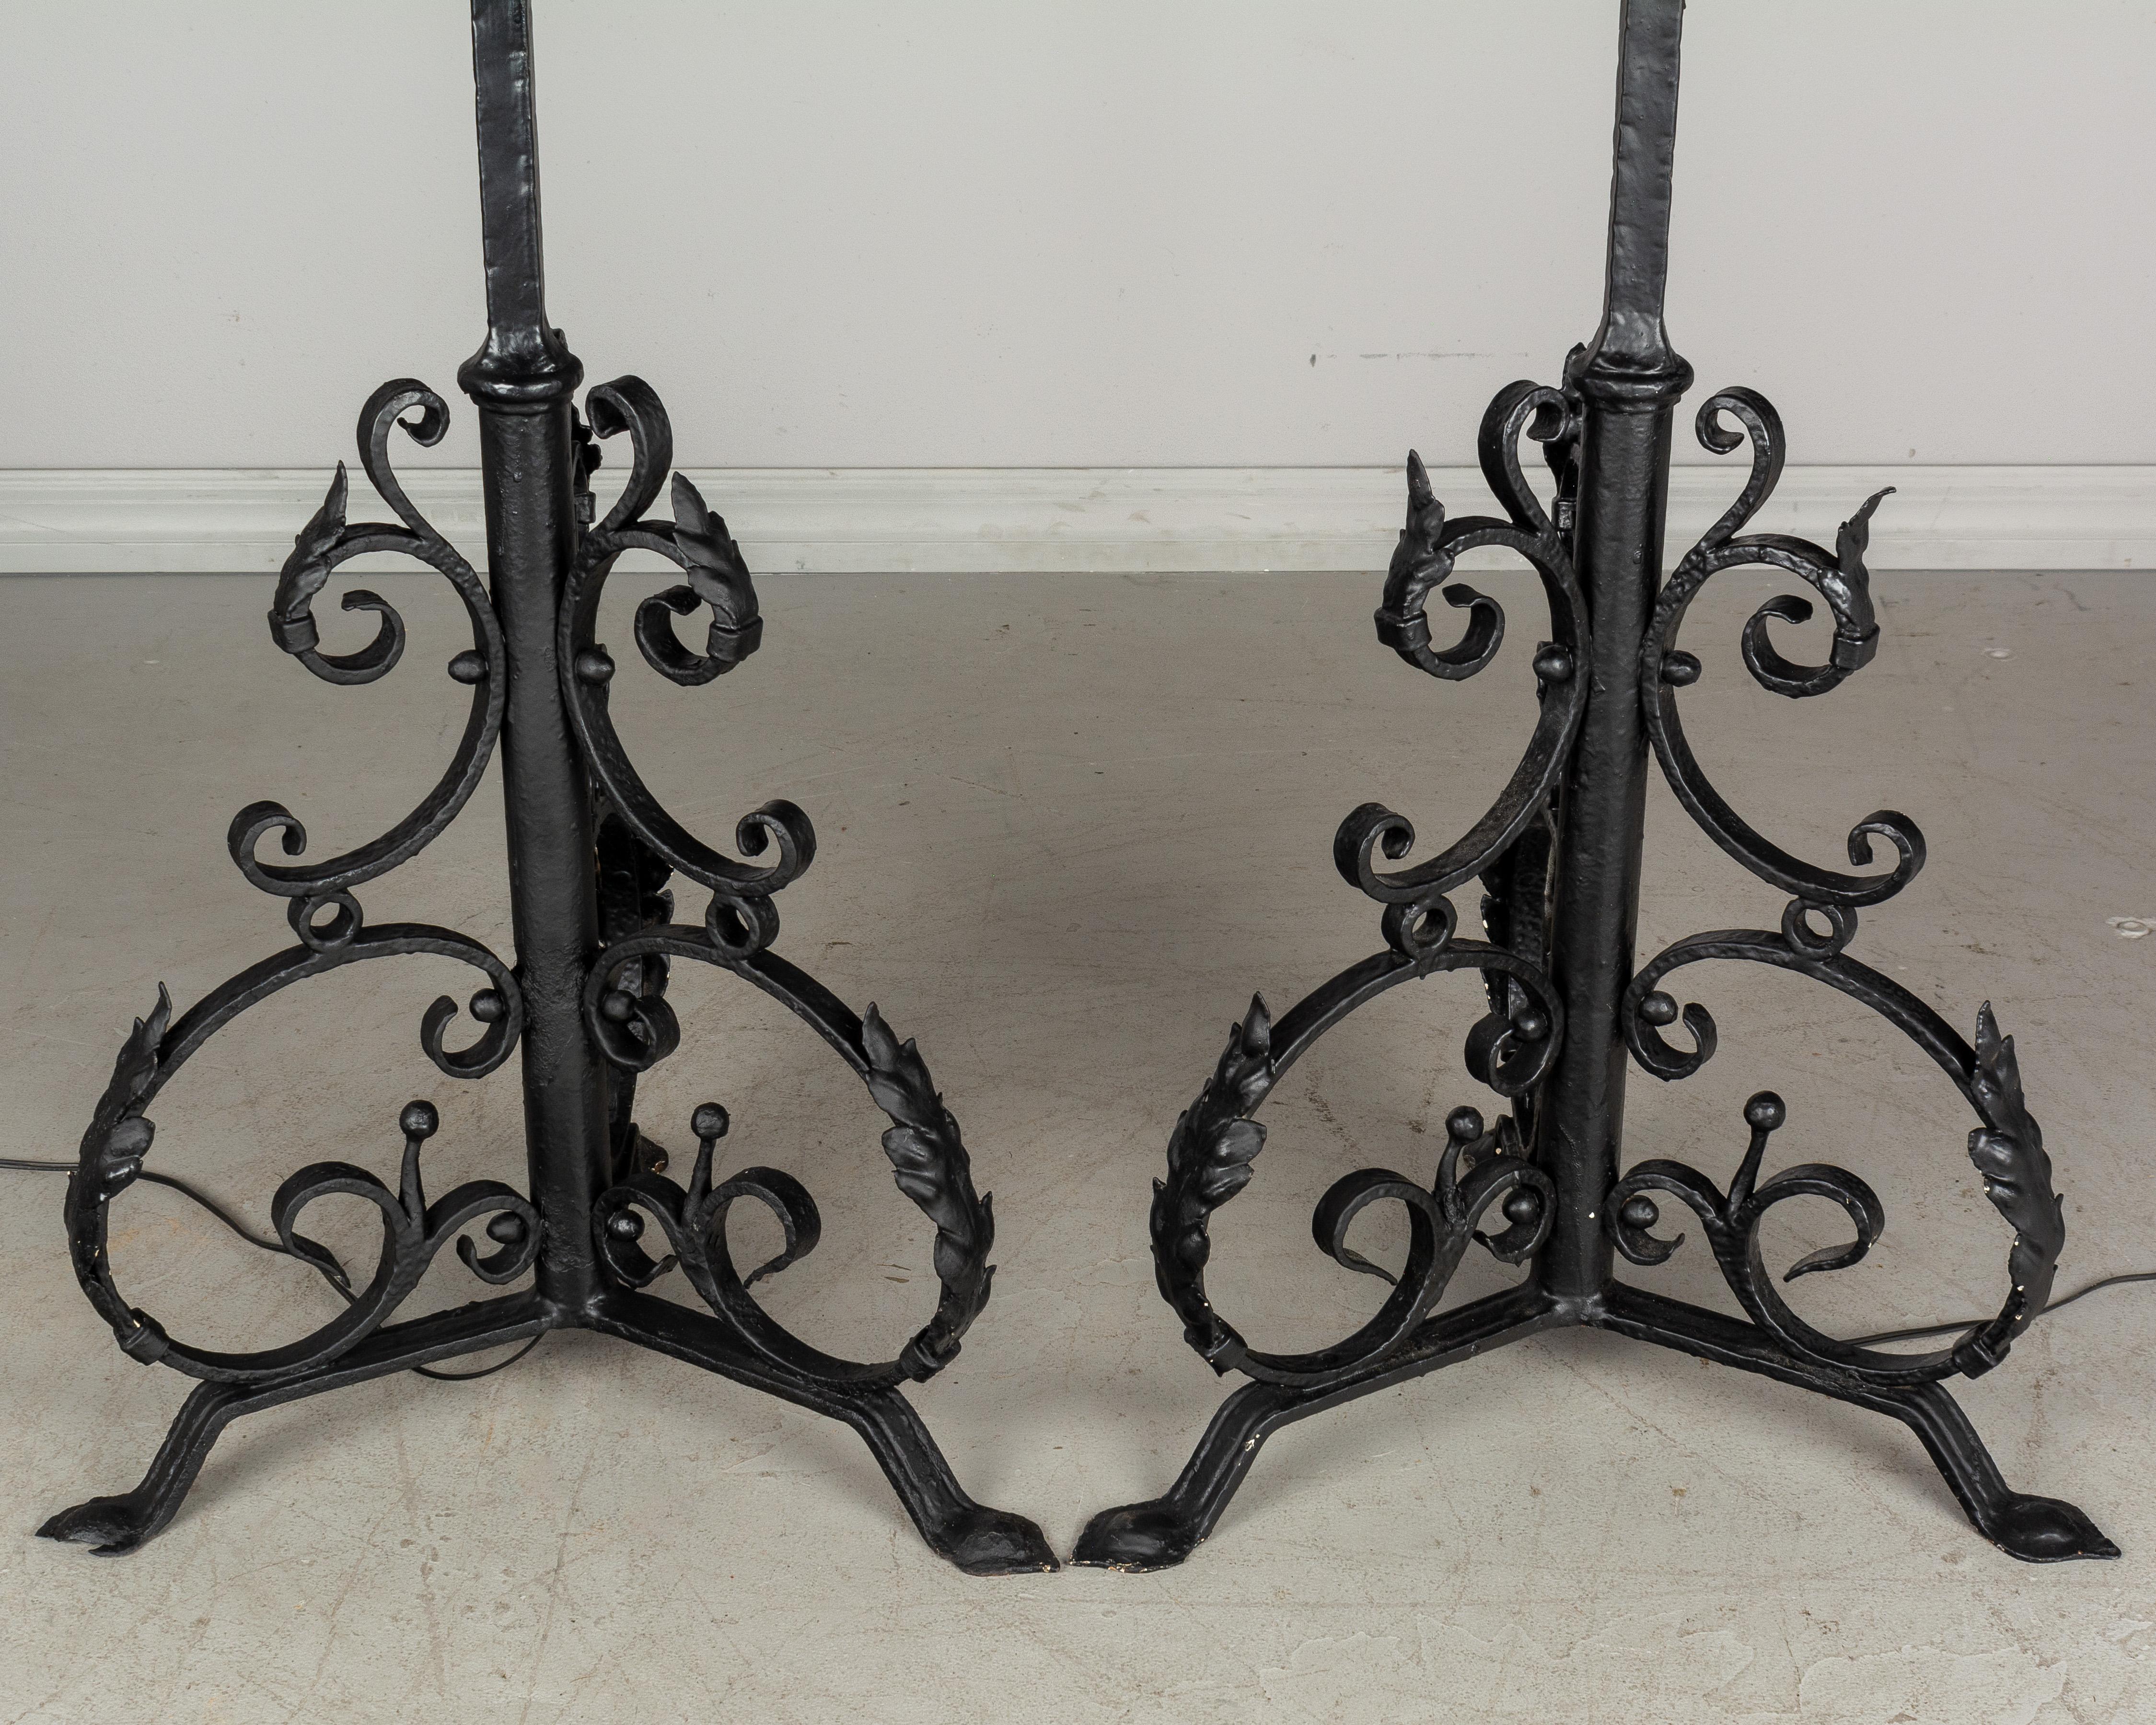 Hand-Crafted Pair of 1920s Spanish Revival Wrought Iron Floor Torchères